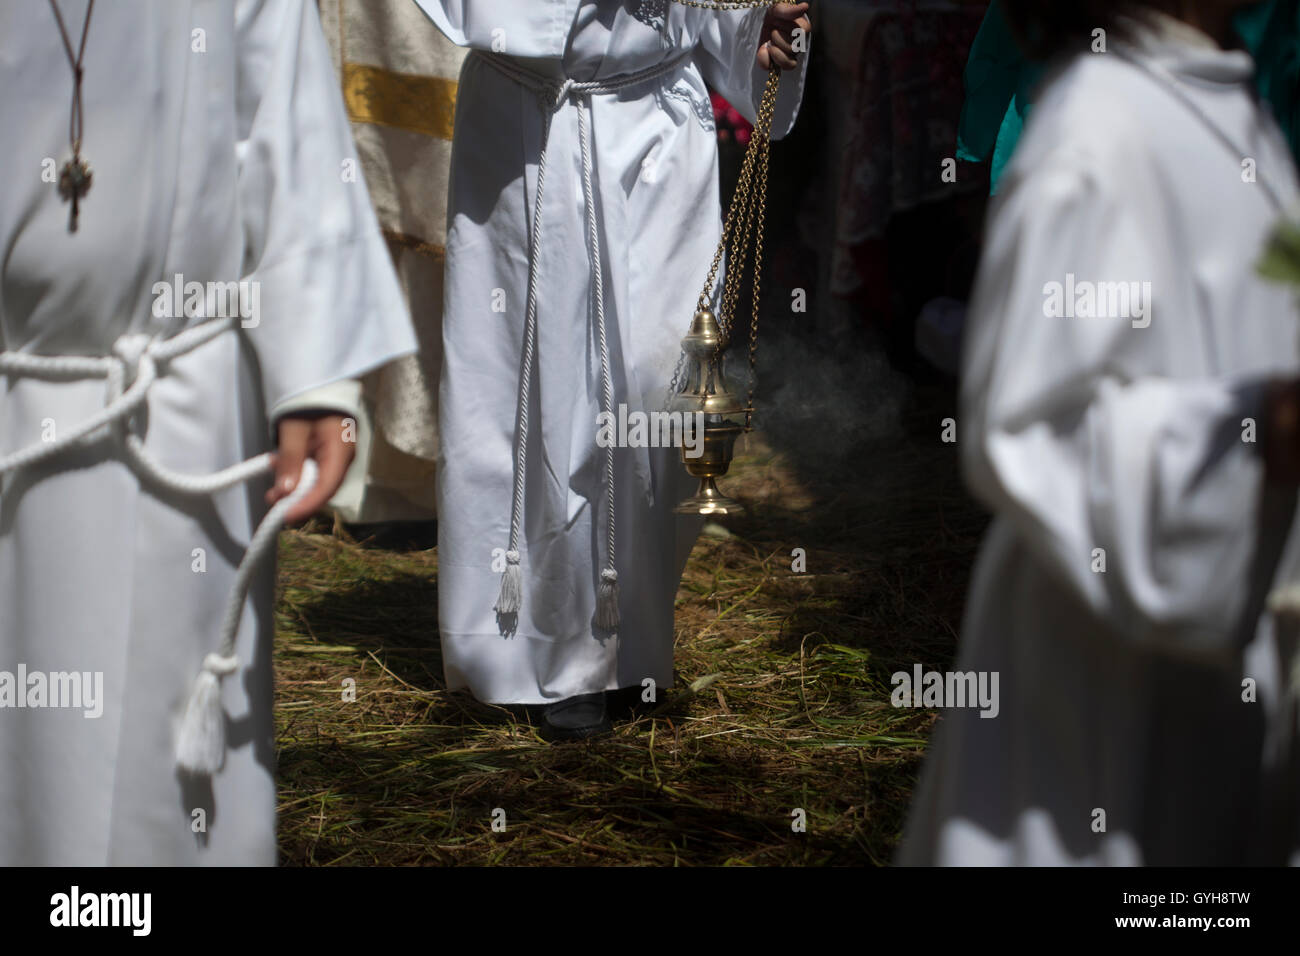 Altar boys spread incense in a street covered with sedge during Corpus Christi religious celebration in El Gastor, Spain Stock Photo